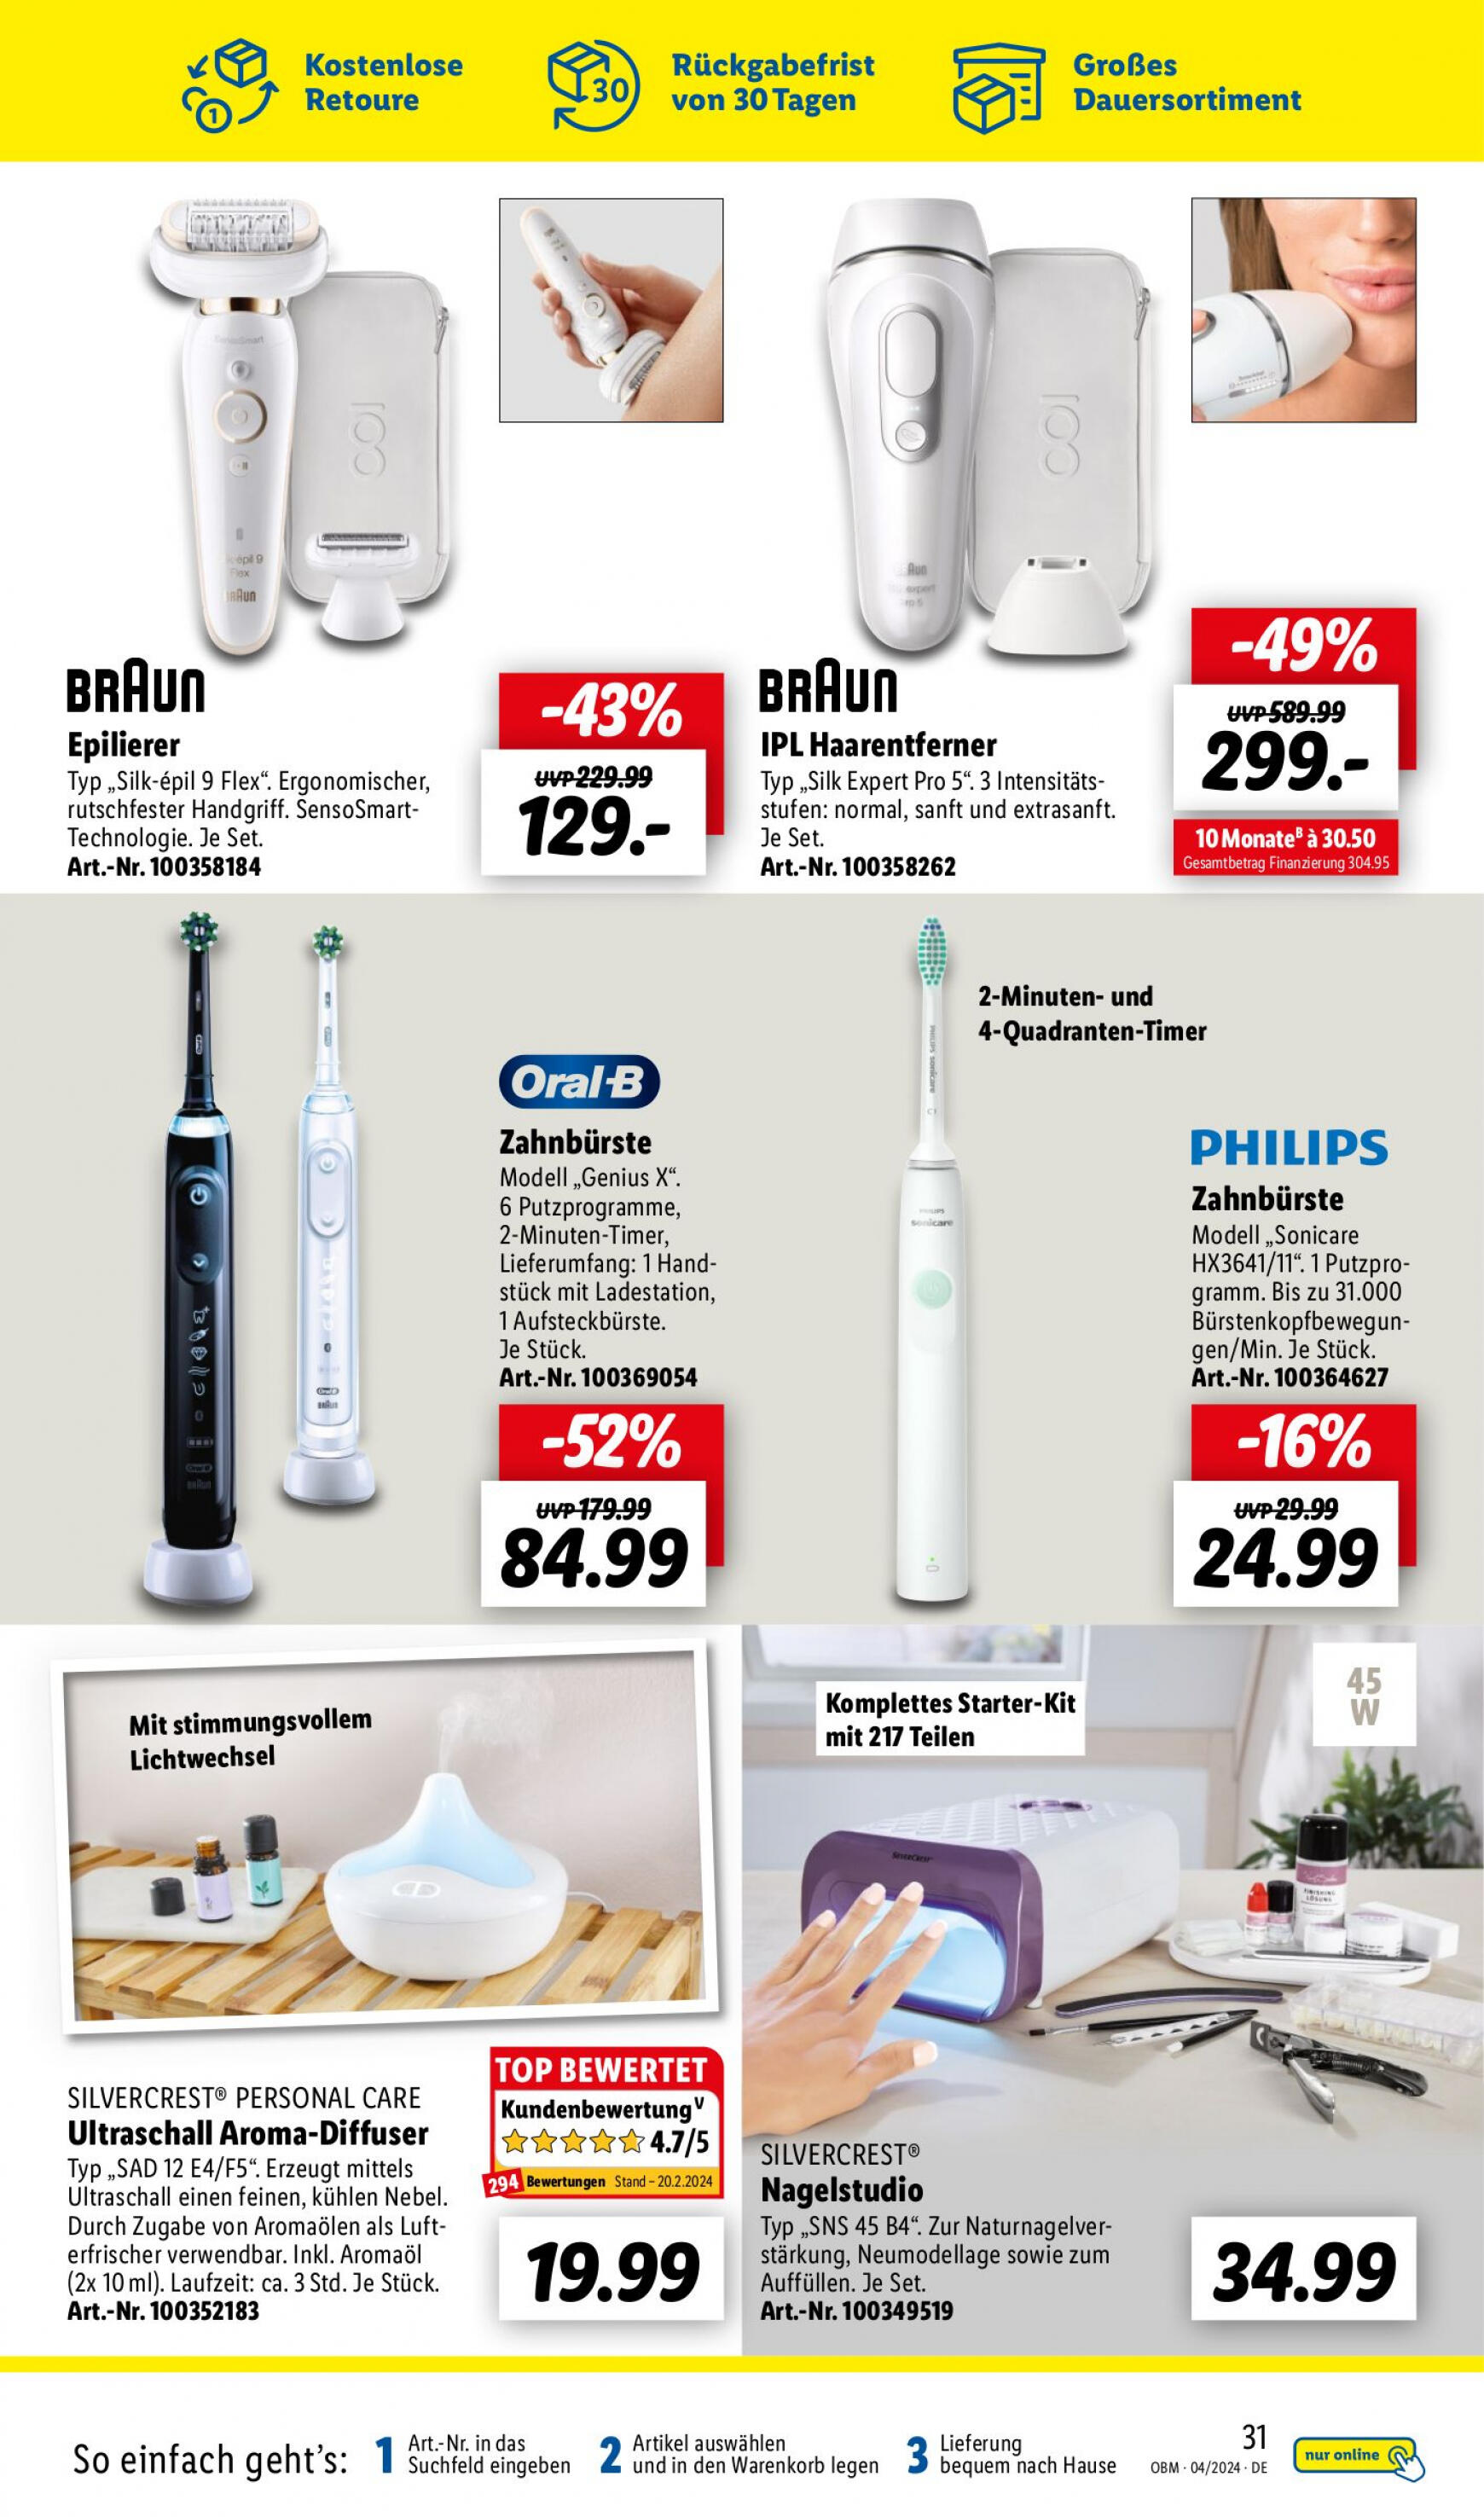 lidl - Flyer Lidl - Aktuelle Onlineshop-Highlights aktuell 01.04. - 30.04. - page: 31